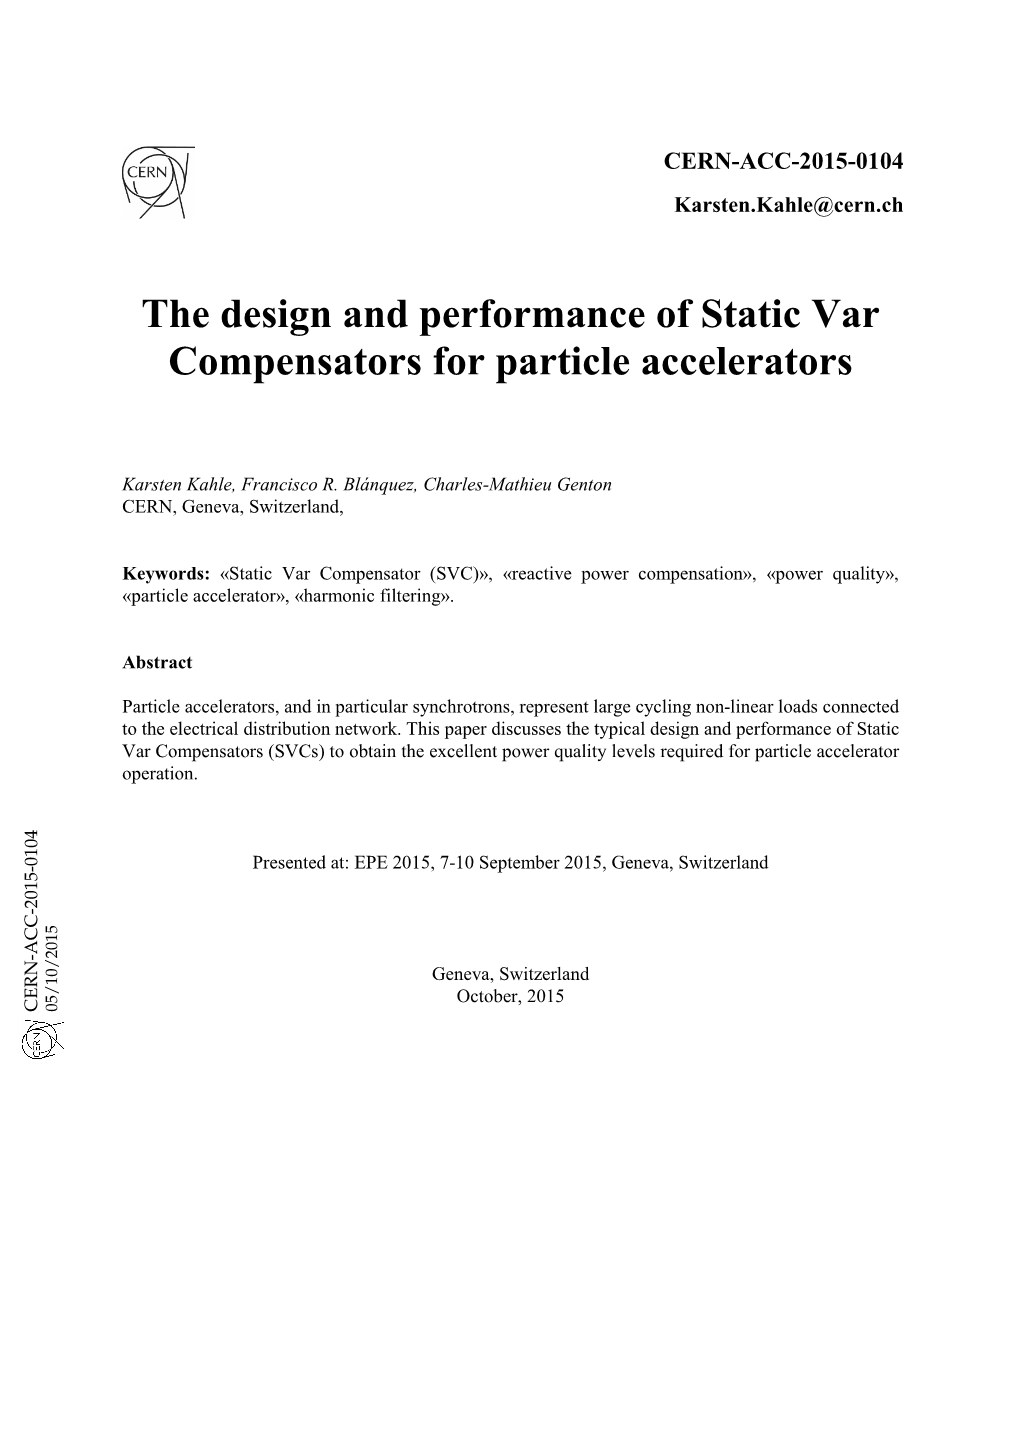 The Design and Performance of Static Var Compensators for Particle Accelerators